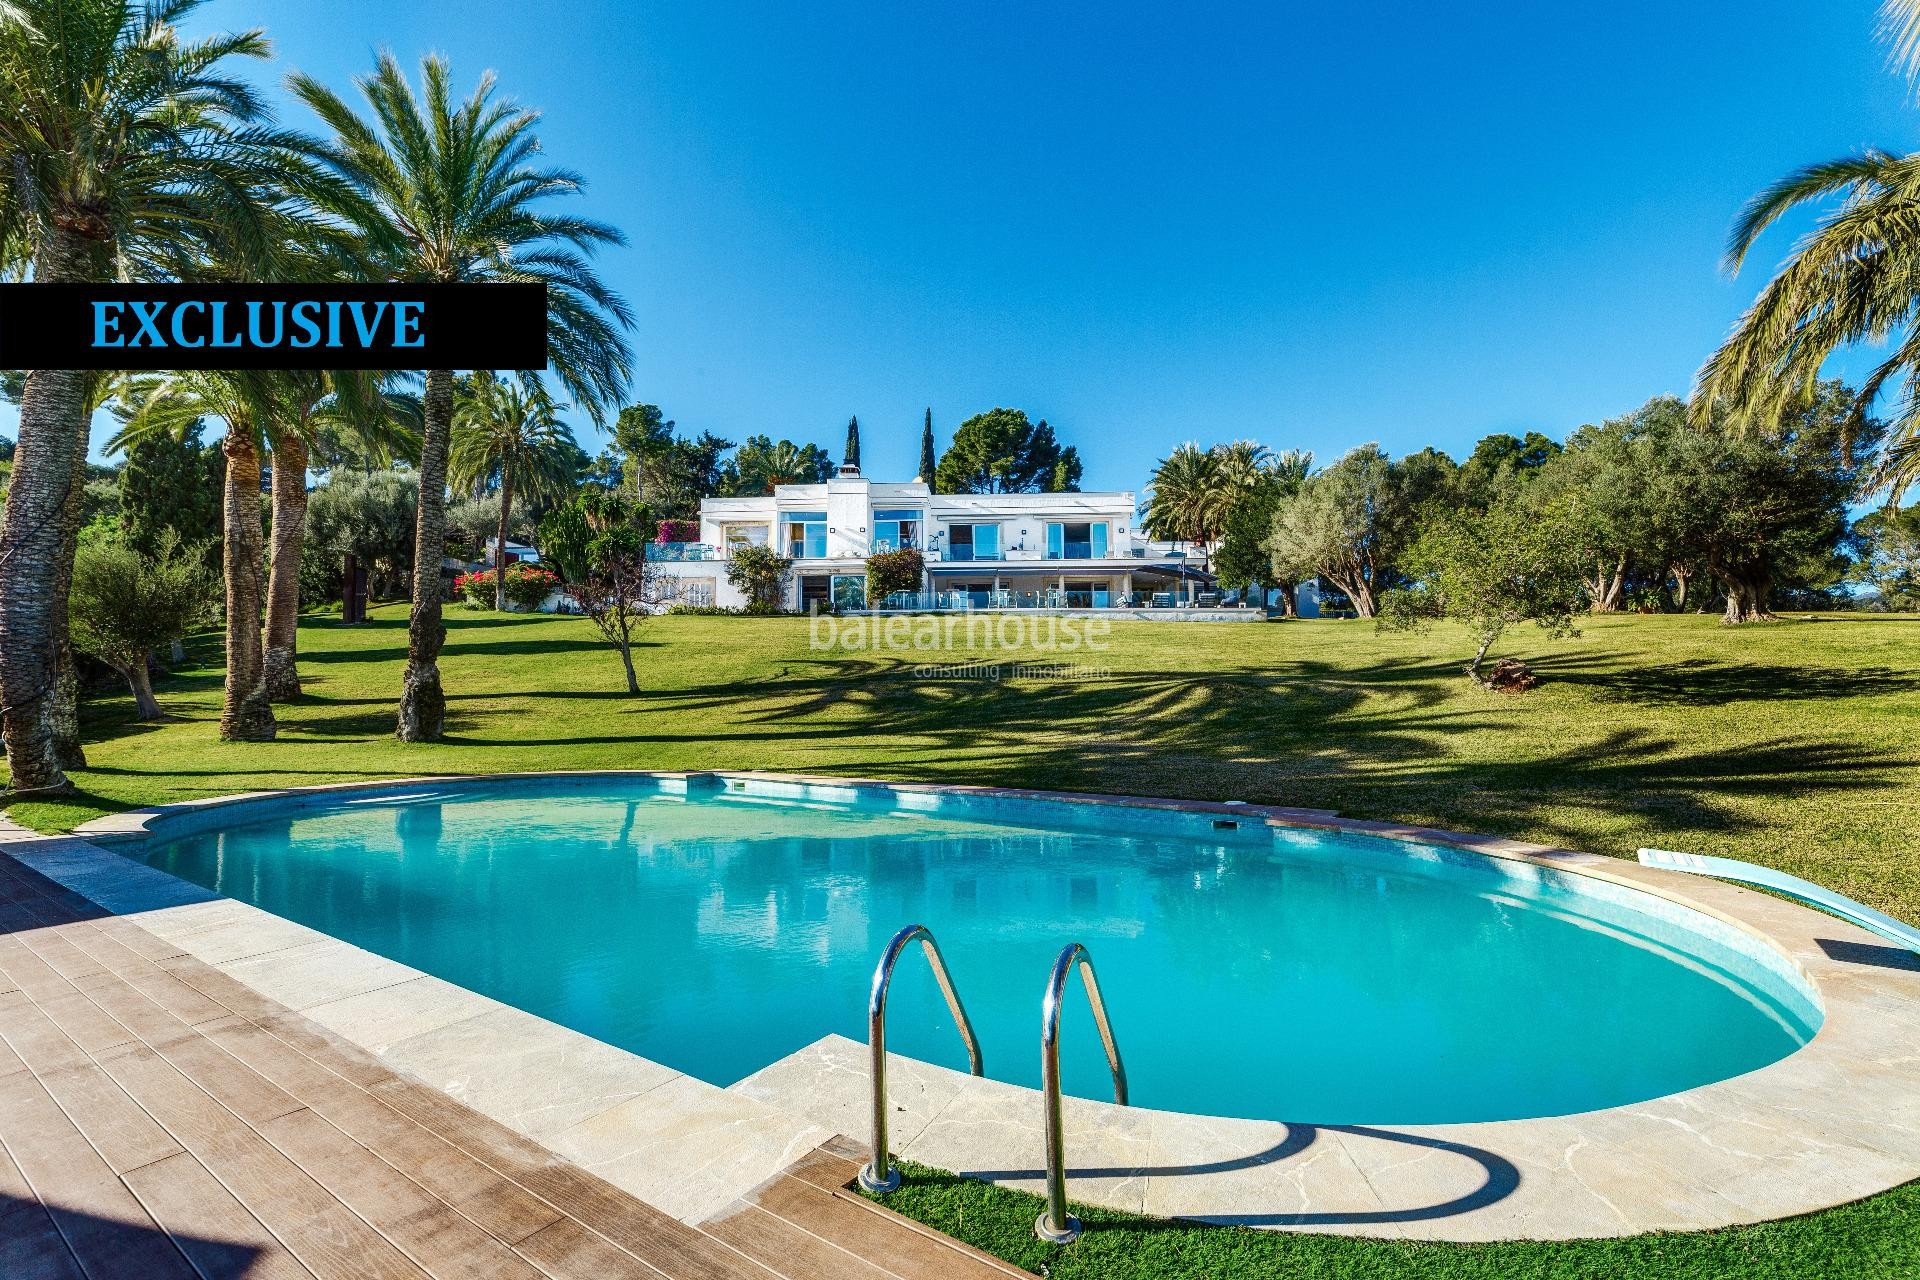 Stunning property in Son Vida with absolute privacy and panoramic view over the bay of Palma